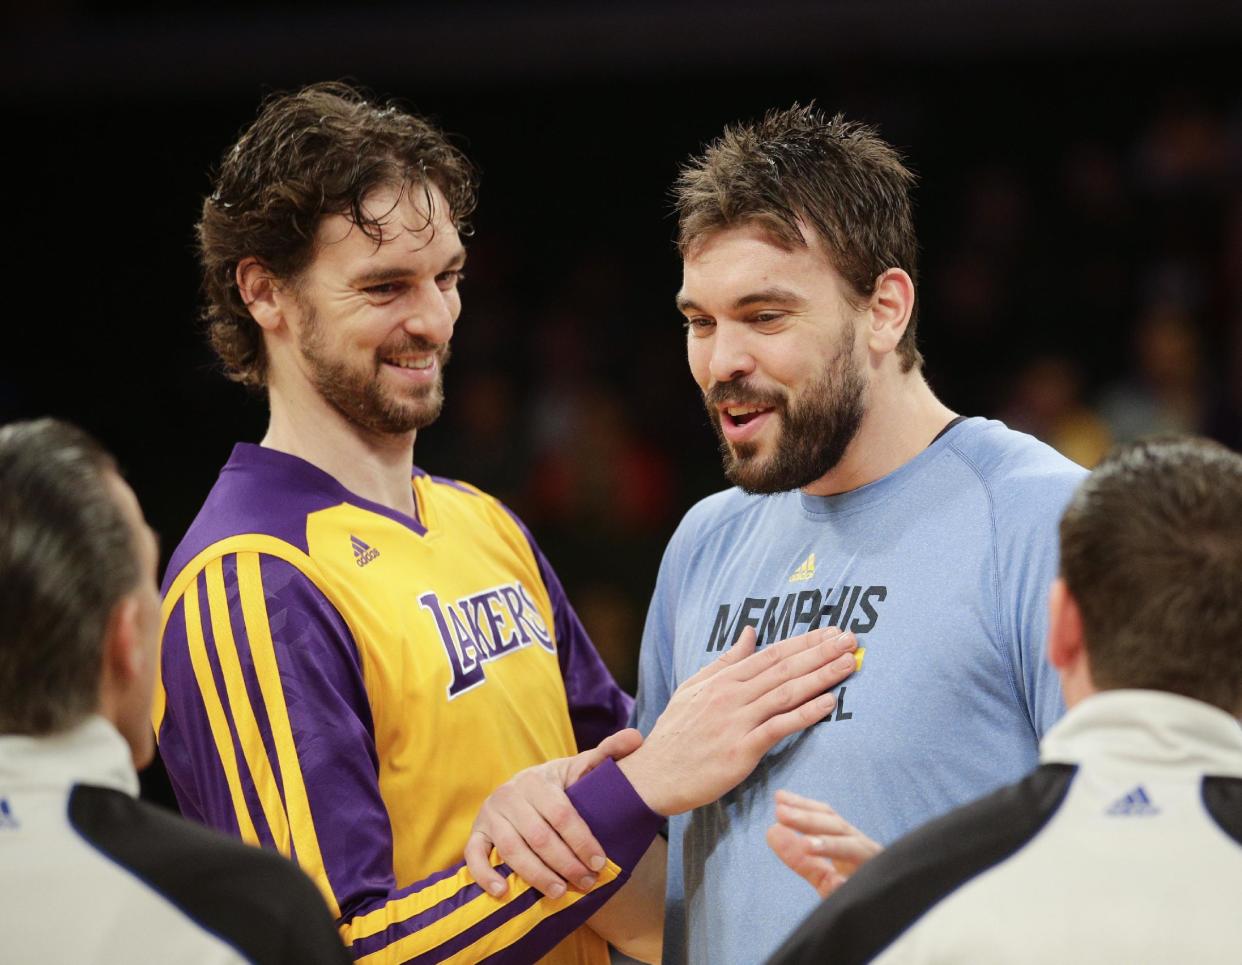 FILE - In this Nov. 15, 2013, file photo, Los Angeles Lakers&#39; Pau Gasol, left, and his brother, Memphis Grizzlies&#39; Marc Gasol talk to referees before an NBA basketball game in Los Angeles. Pau and Marc Gasol will make history Sunday, Feb. 15, 2015, when the Spanish centers become the first brothers to start against each other in the NBA All-Star game. (AP Photo/Jae C. Hong, File)